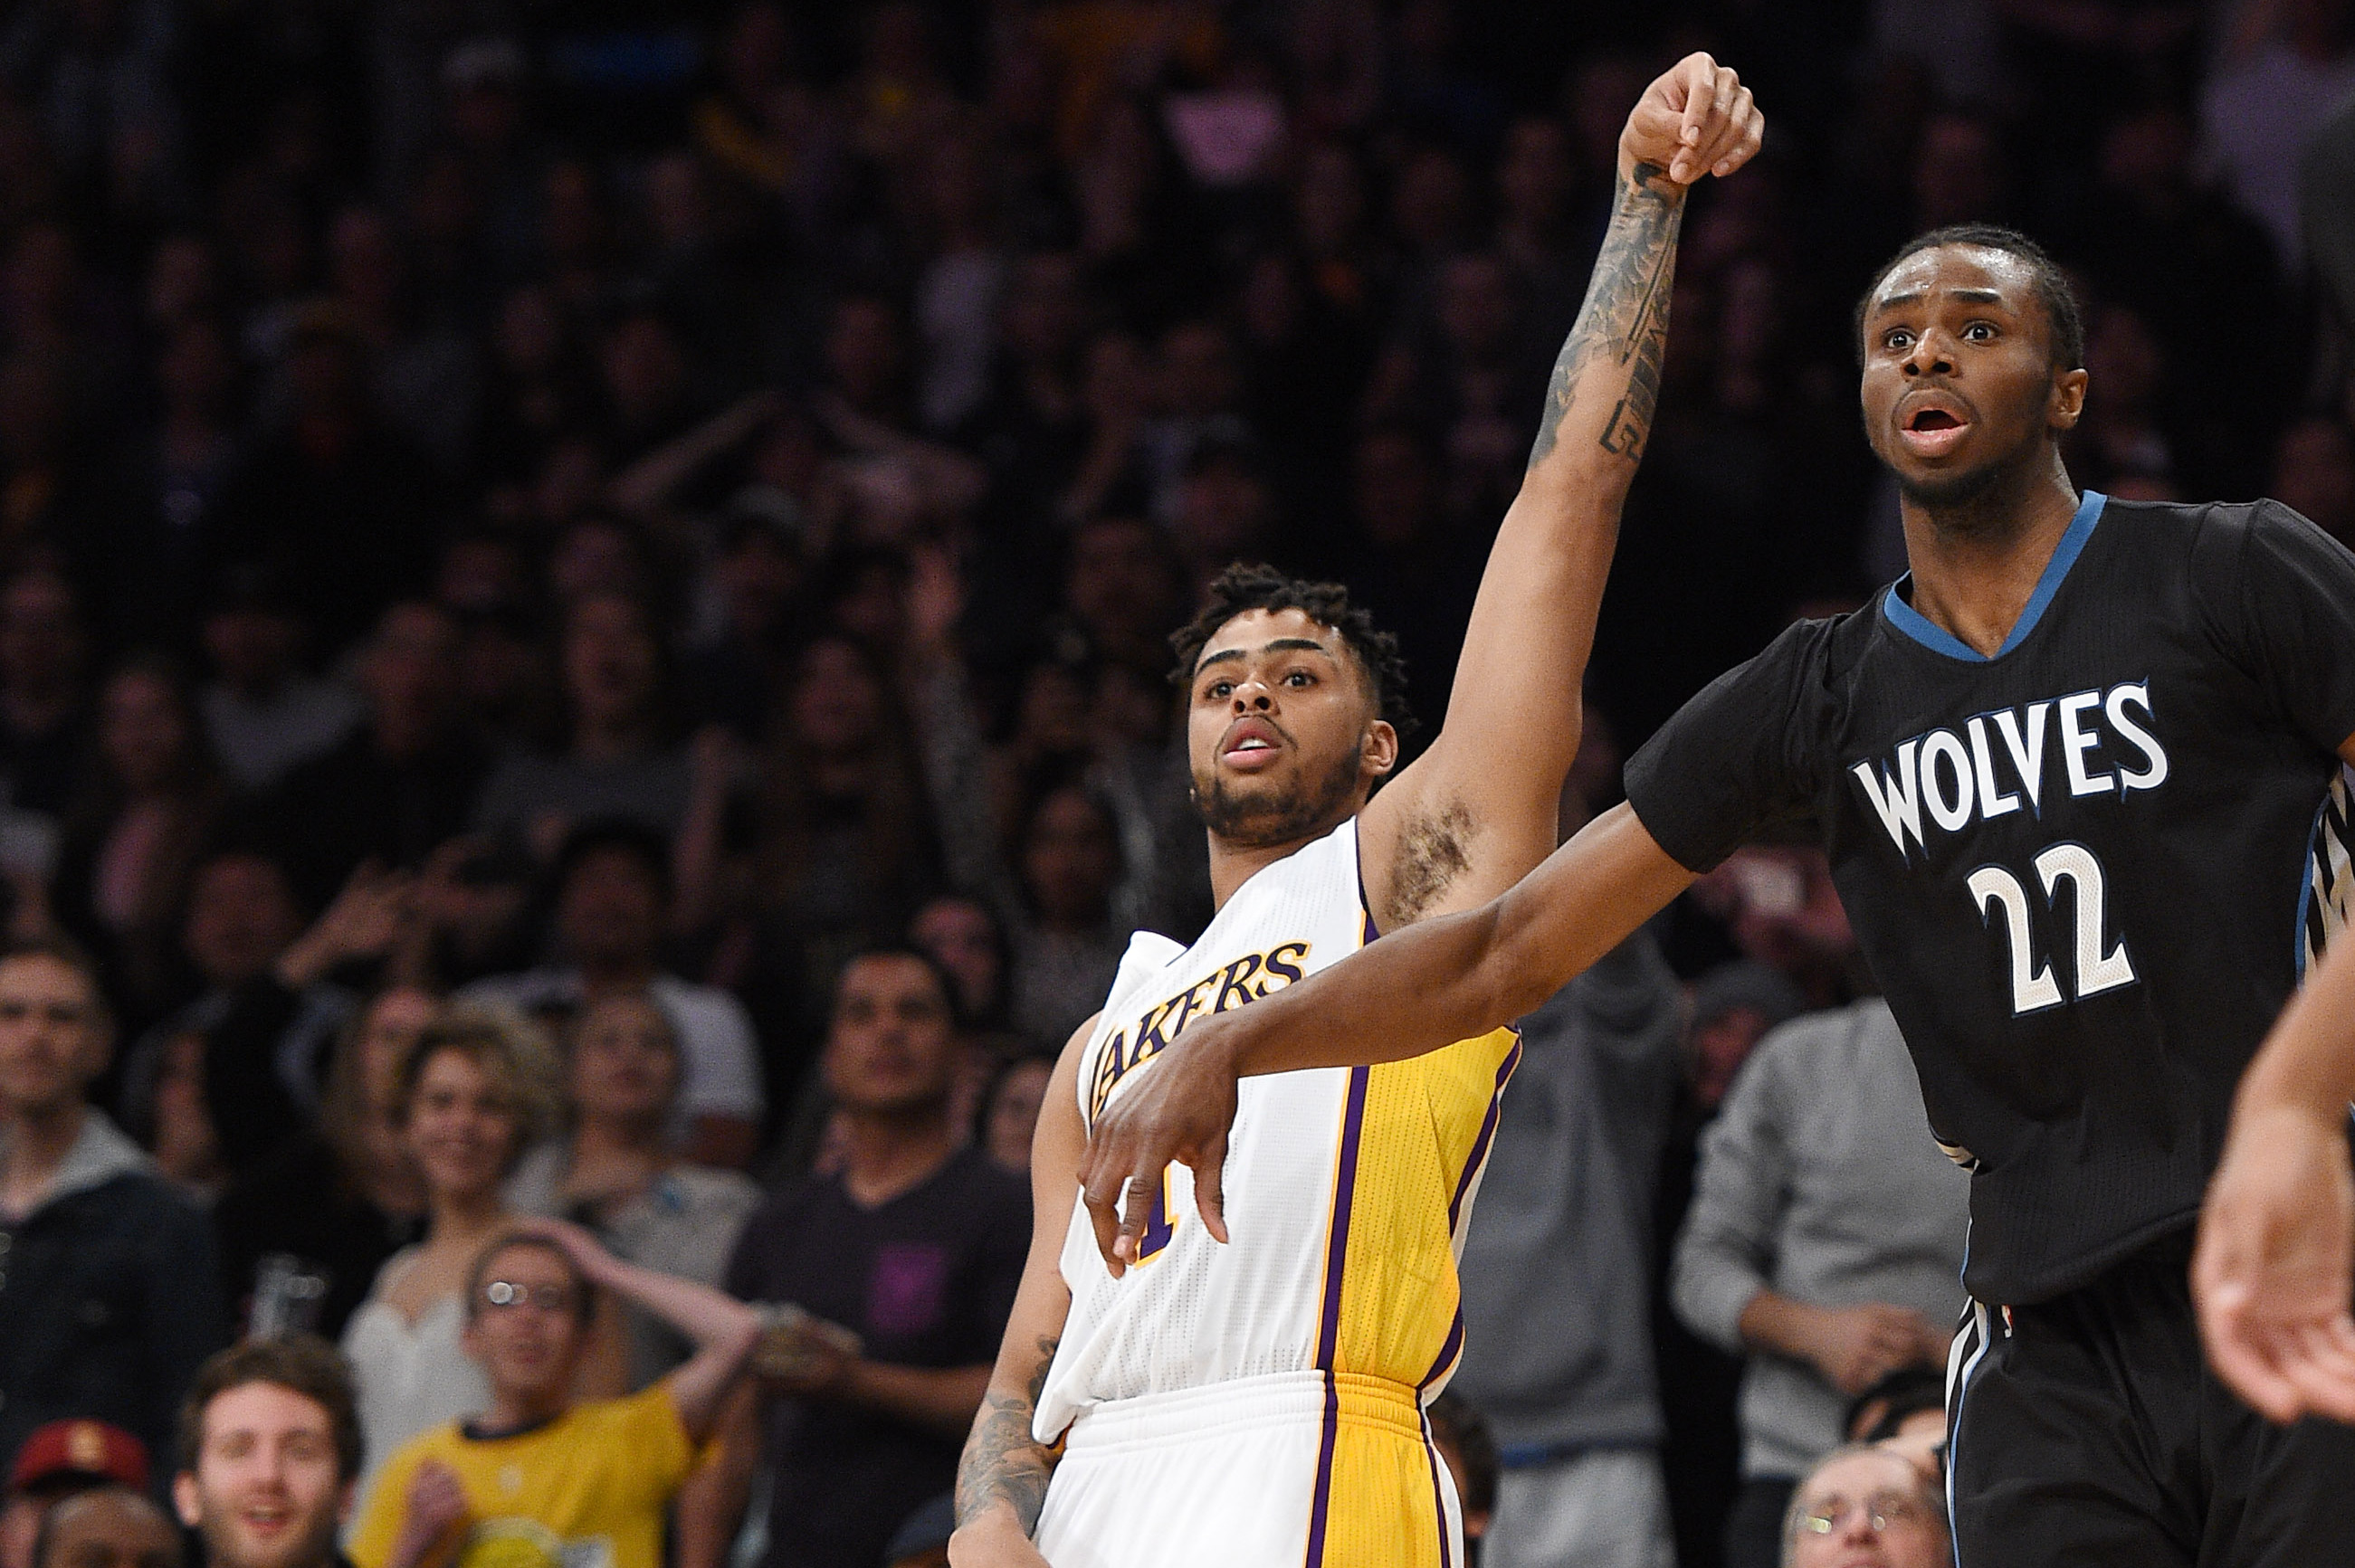 Reports: D'Angelo Russell to Warriors in 3-team deal with Timberwolves